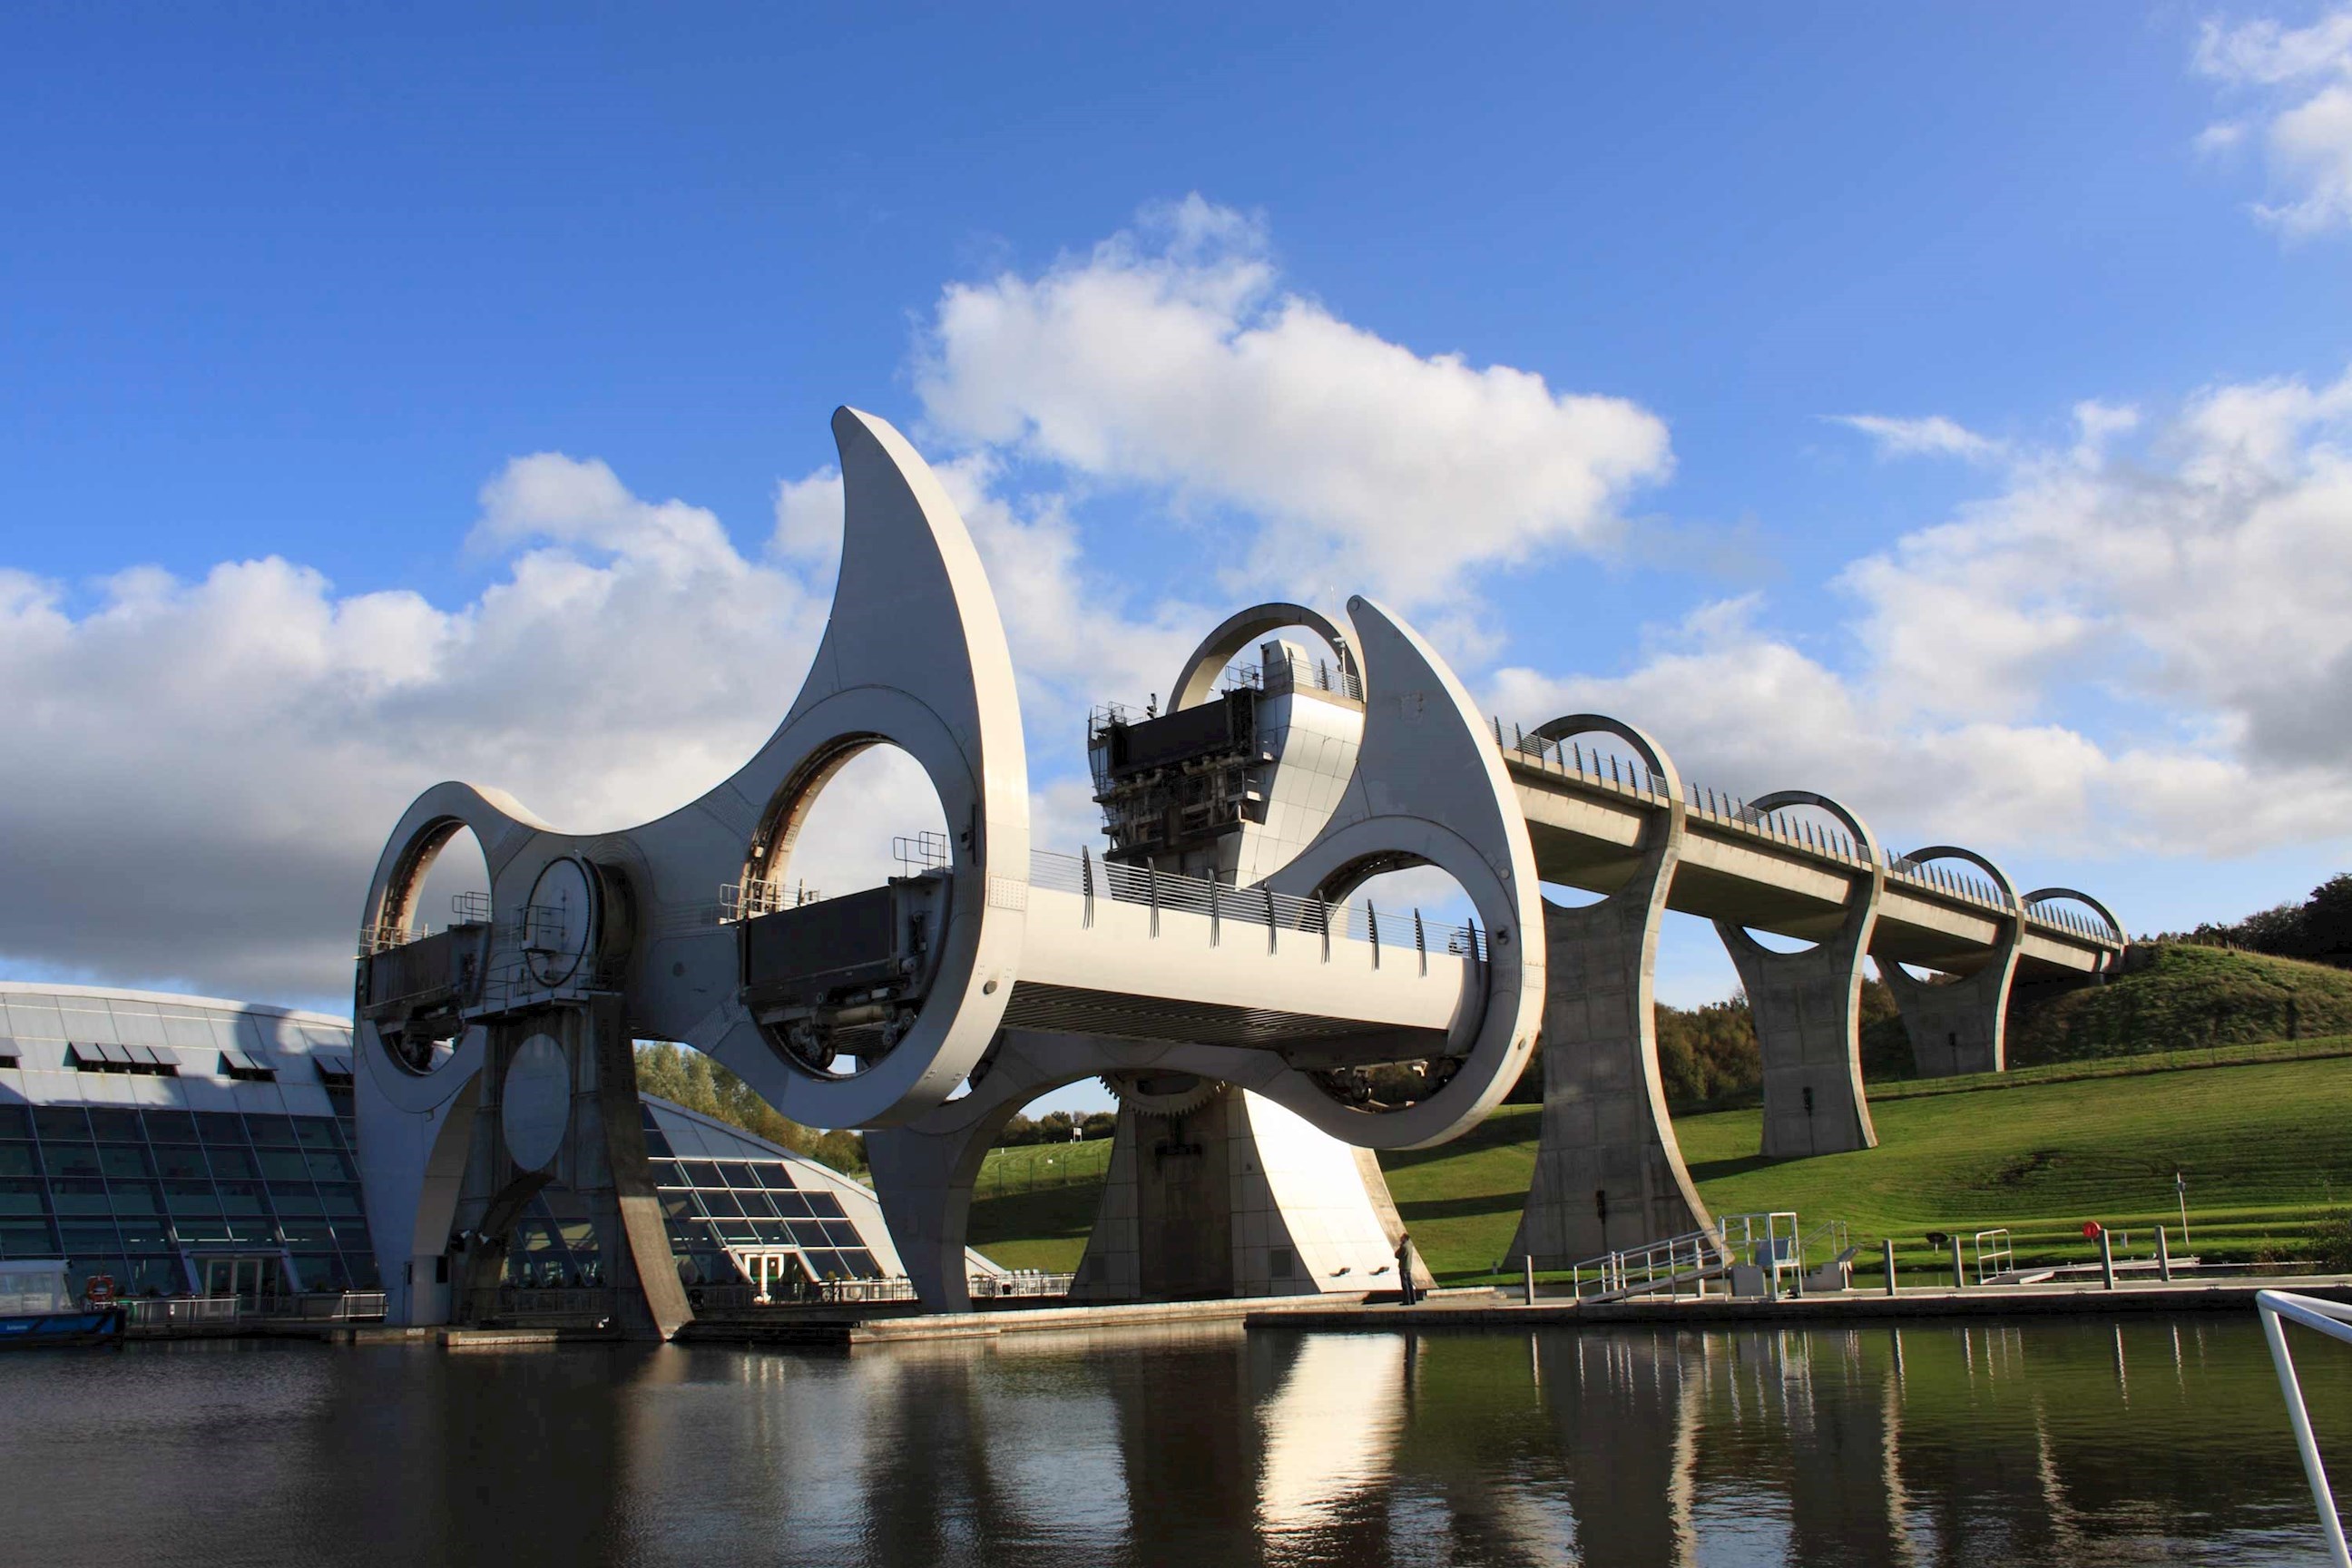 Visit the Falkirk Wheel to learn about Scotland's canal system